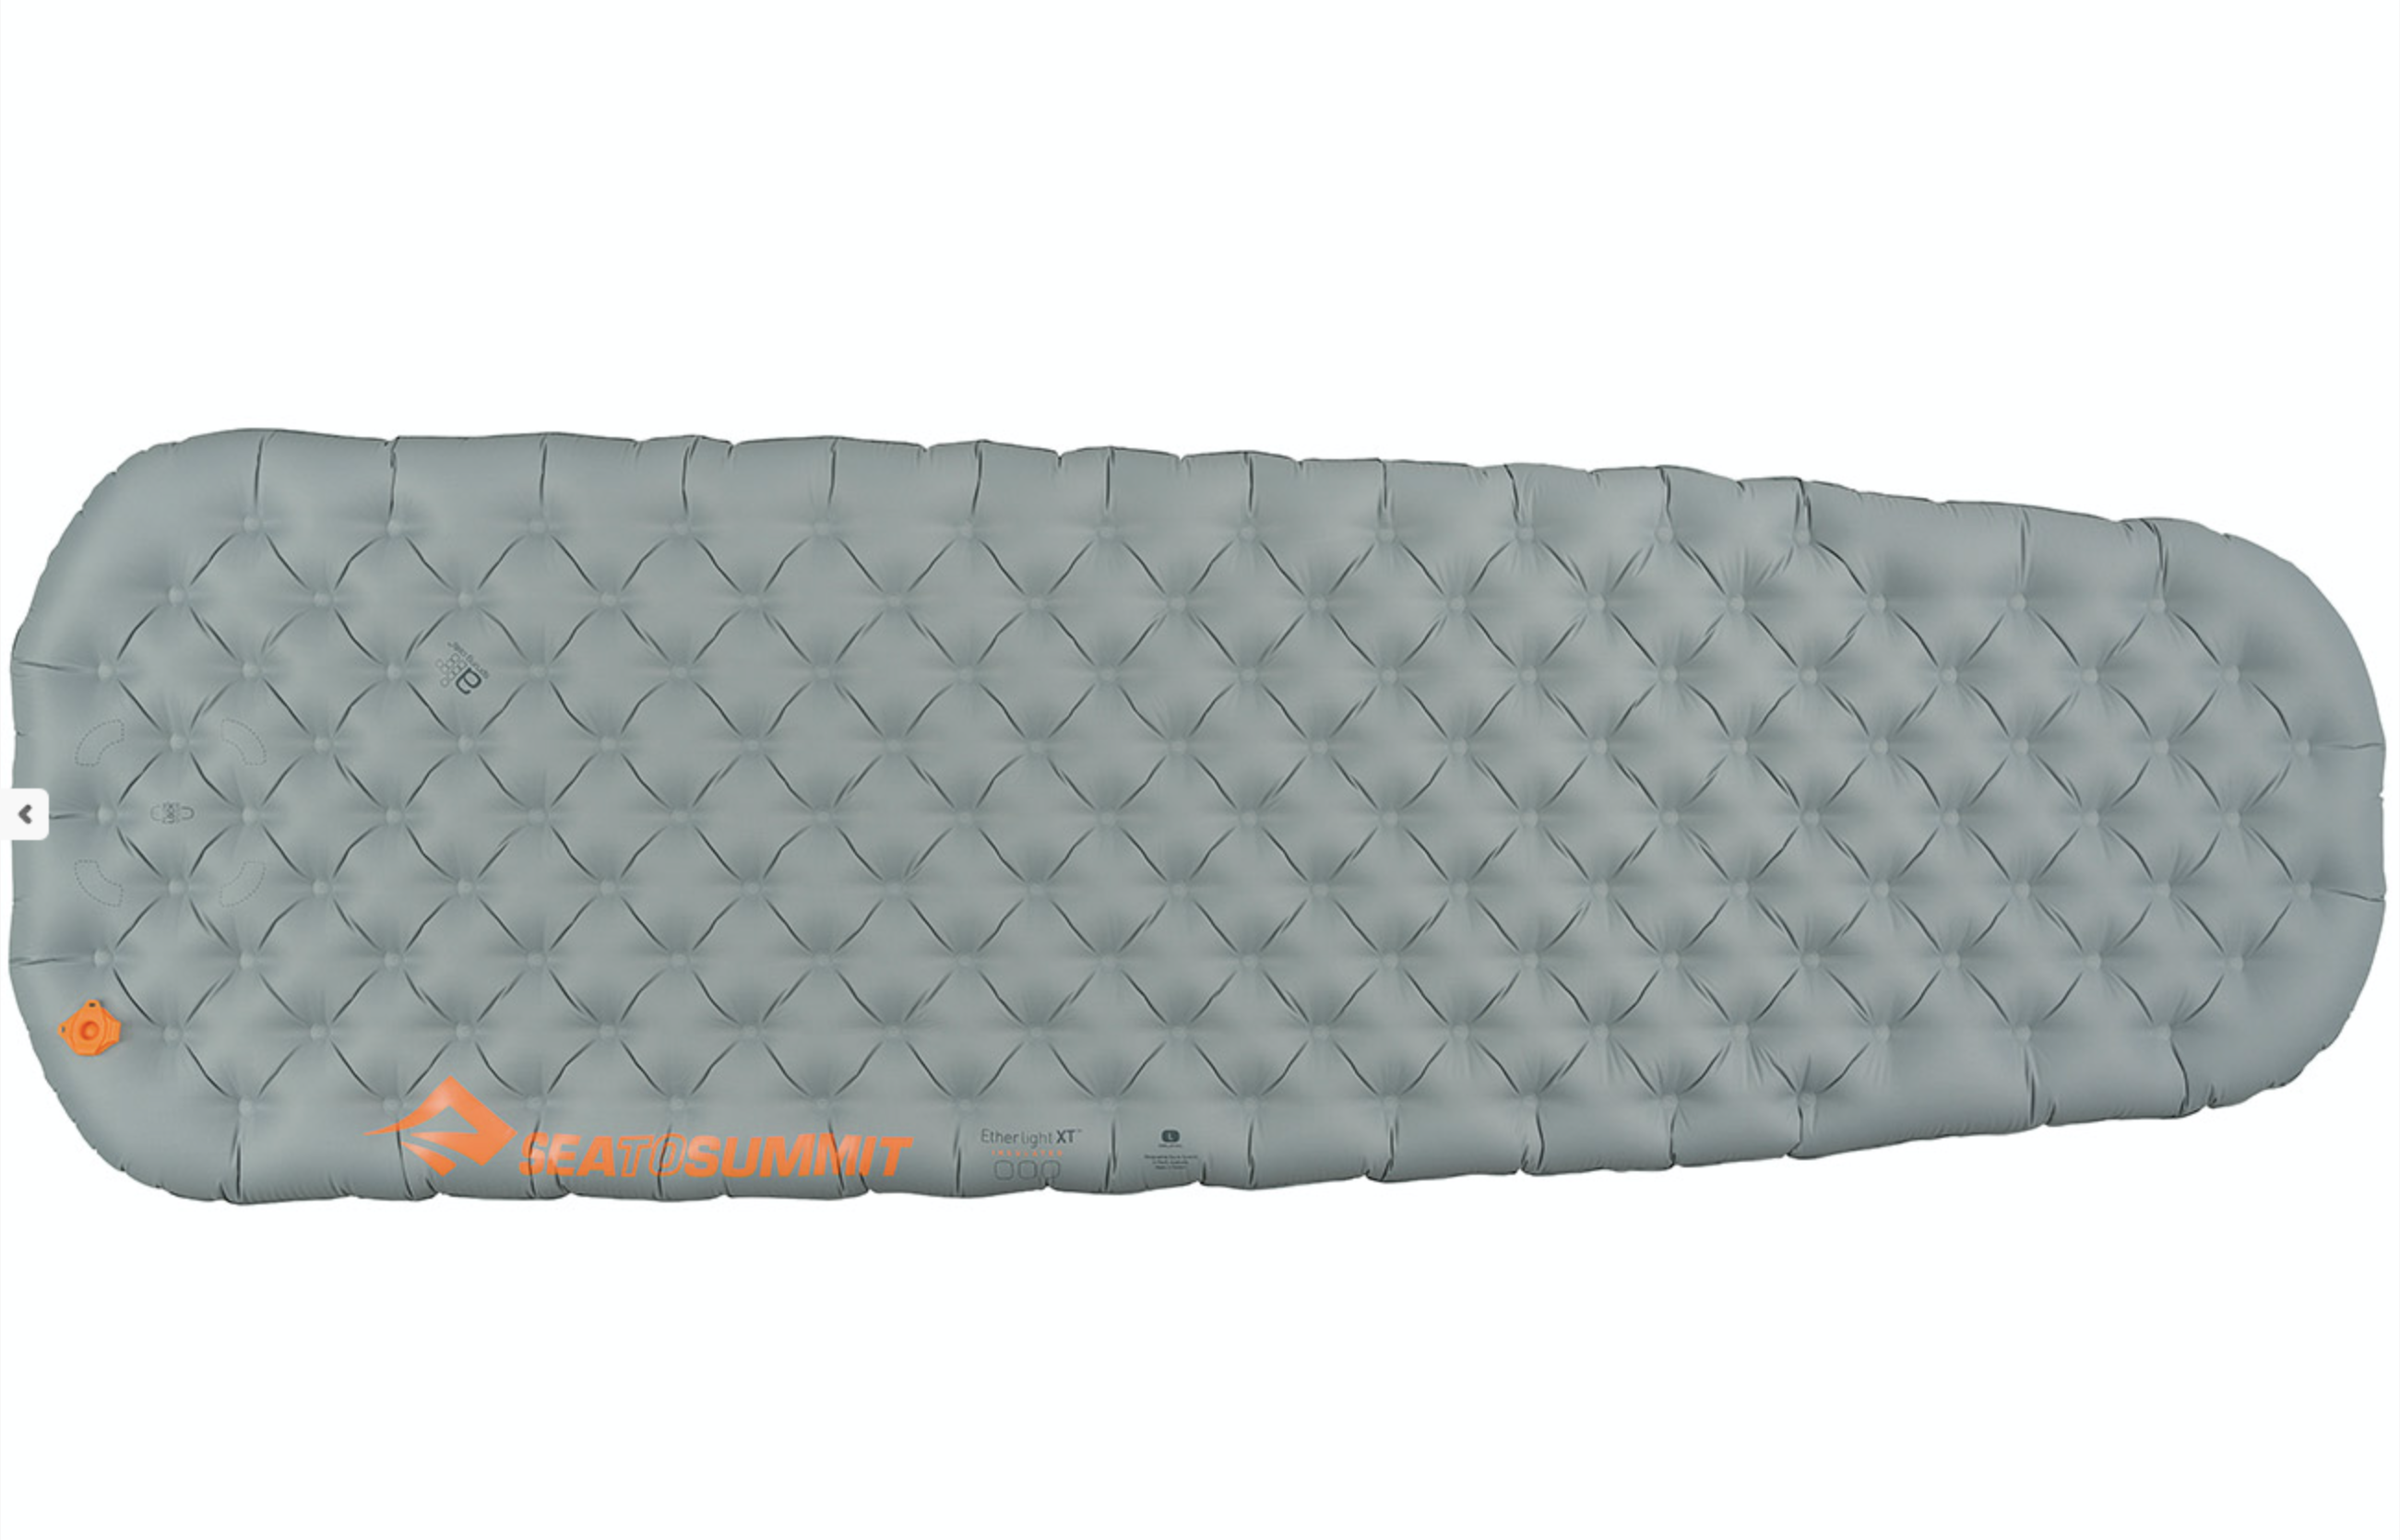 Sea to summit Ether Light XT Insulated Sleeping Mat Large